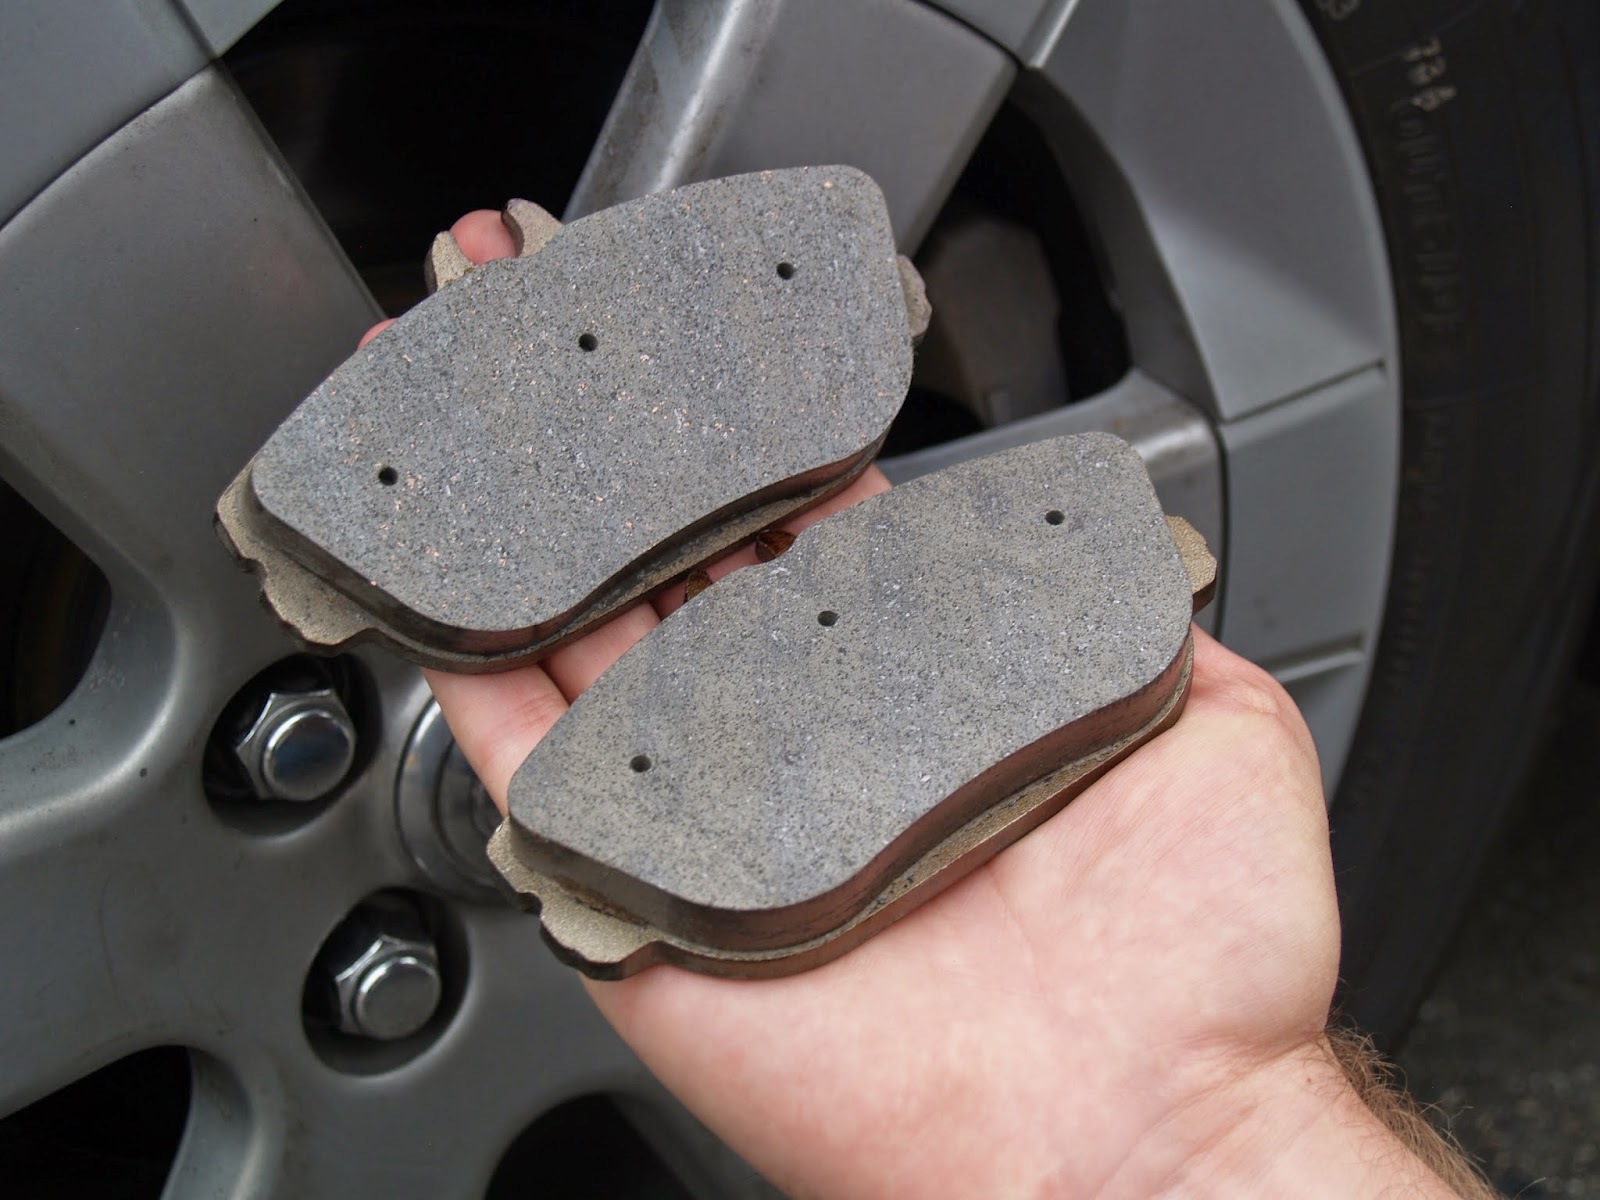 Common automotive break pads contain heavy metals, including copper, that are deposited onto the roadway every time we brake.